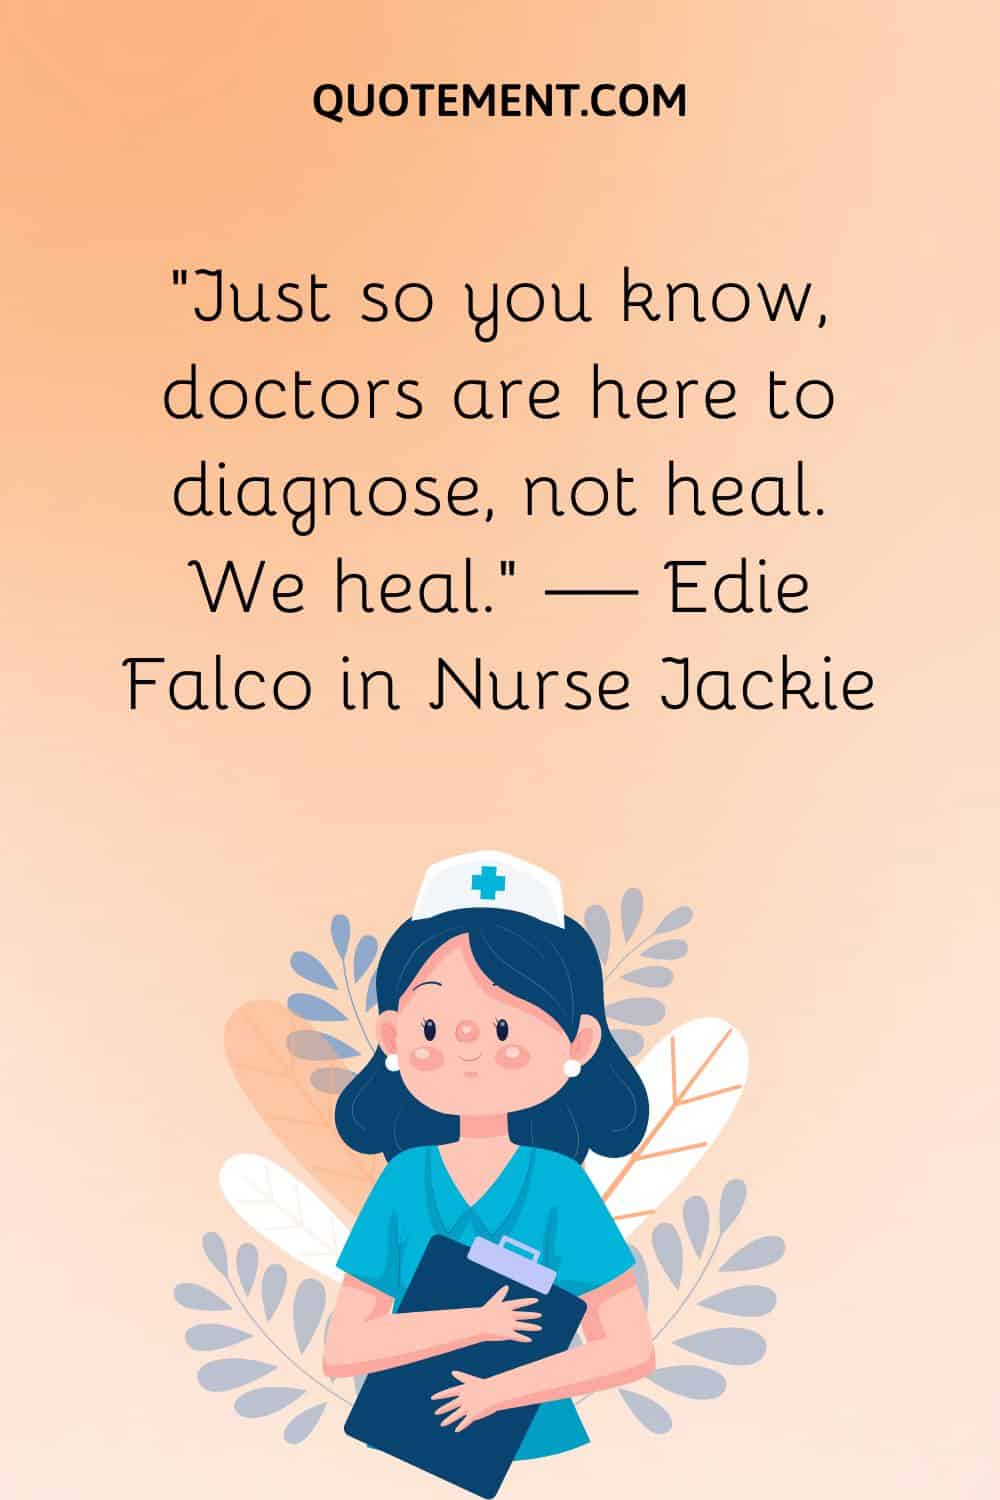 “Just so you know, doctors are here to diagnose, not heal. We heal.” — Edie Falco in Nurse Jackie